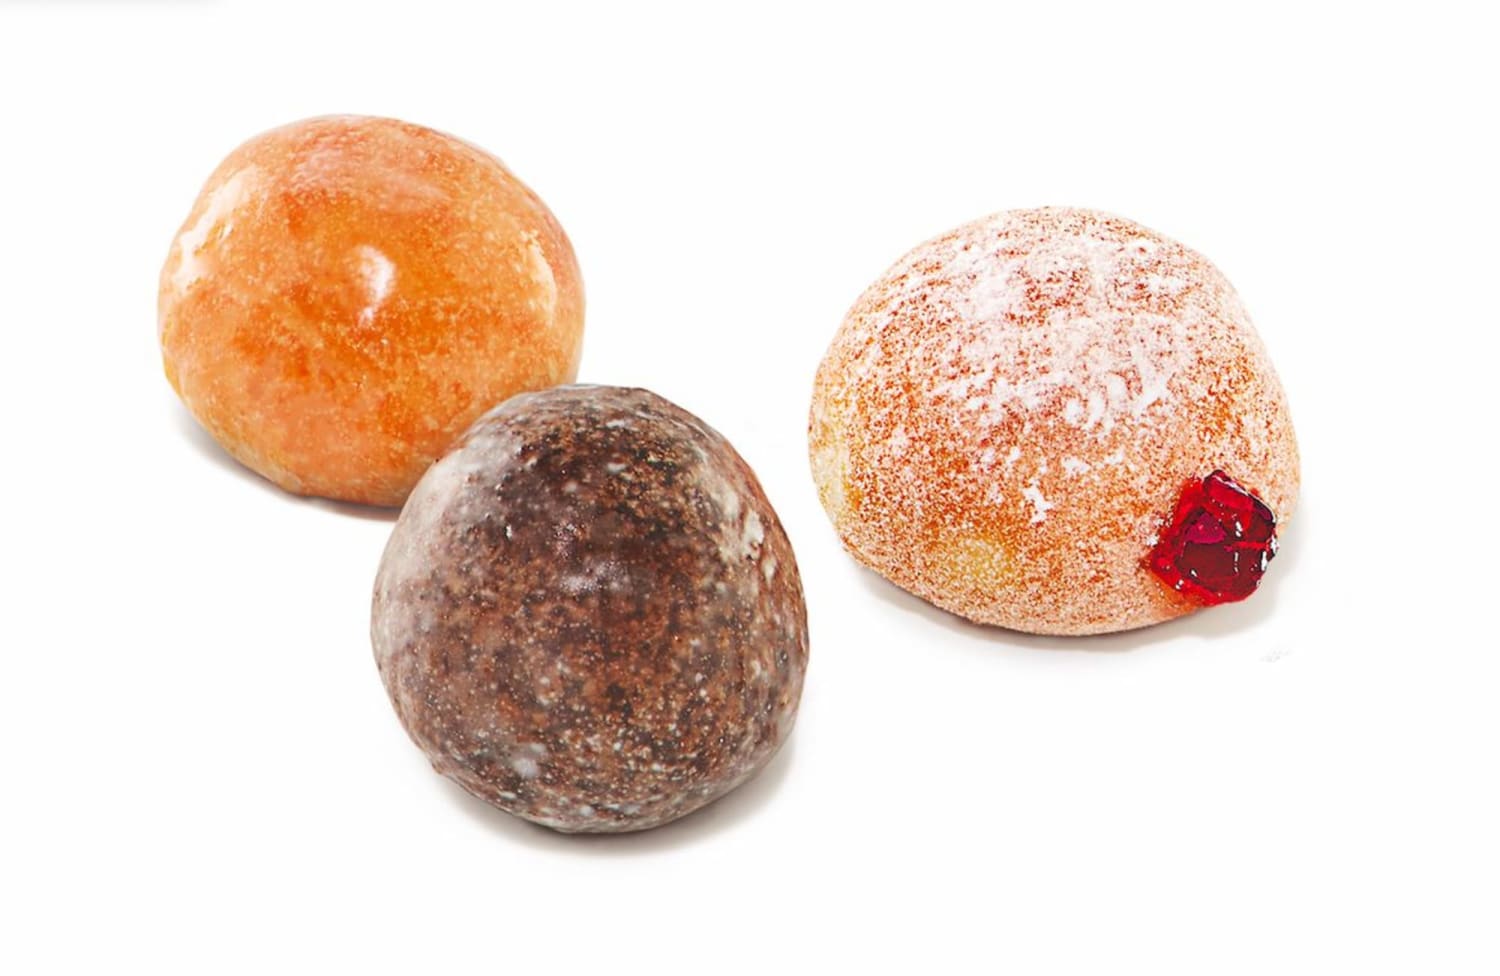 Which Dunkin beverage and Munchkins pairing starts your day running?